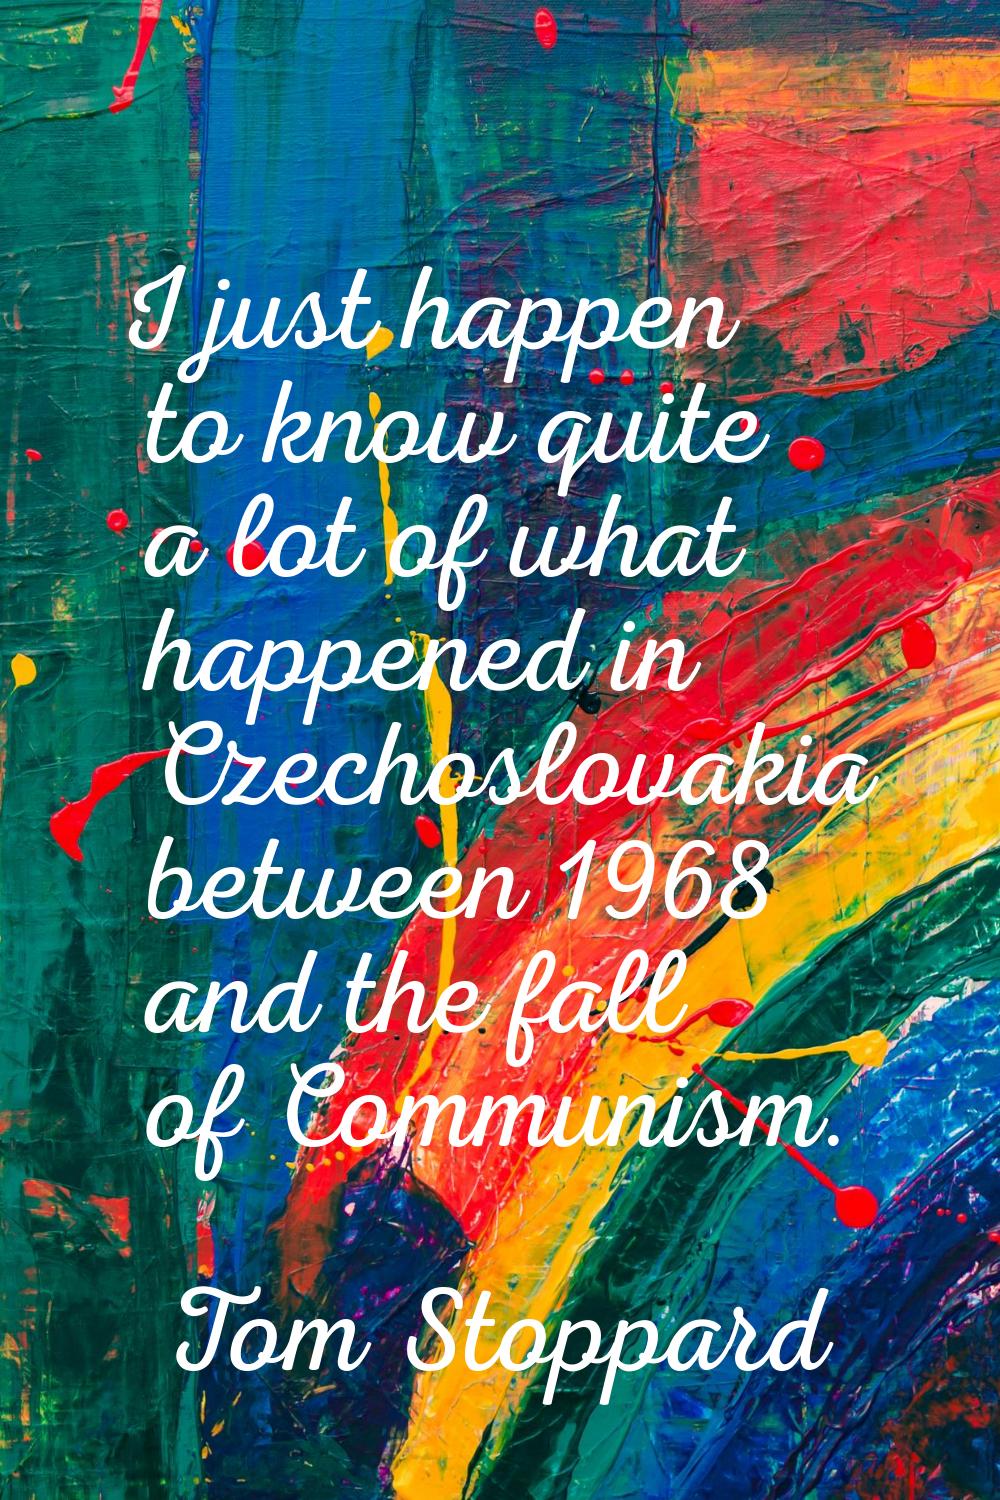 I just happen to know quite a lot of what happened in Czechoslovakia between 1968 and the fall of C